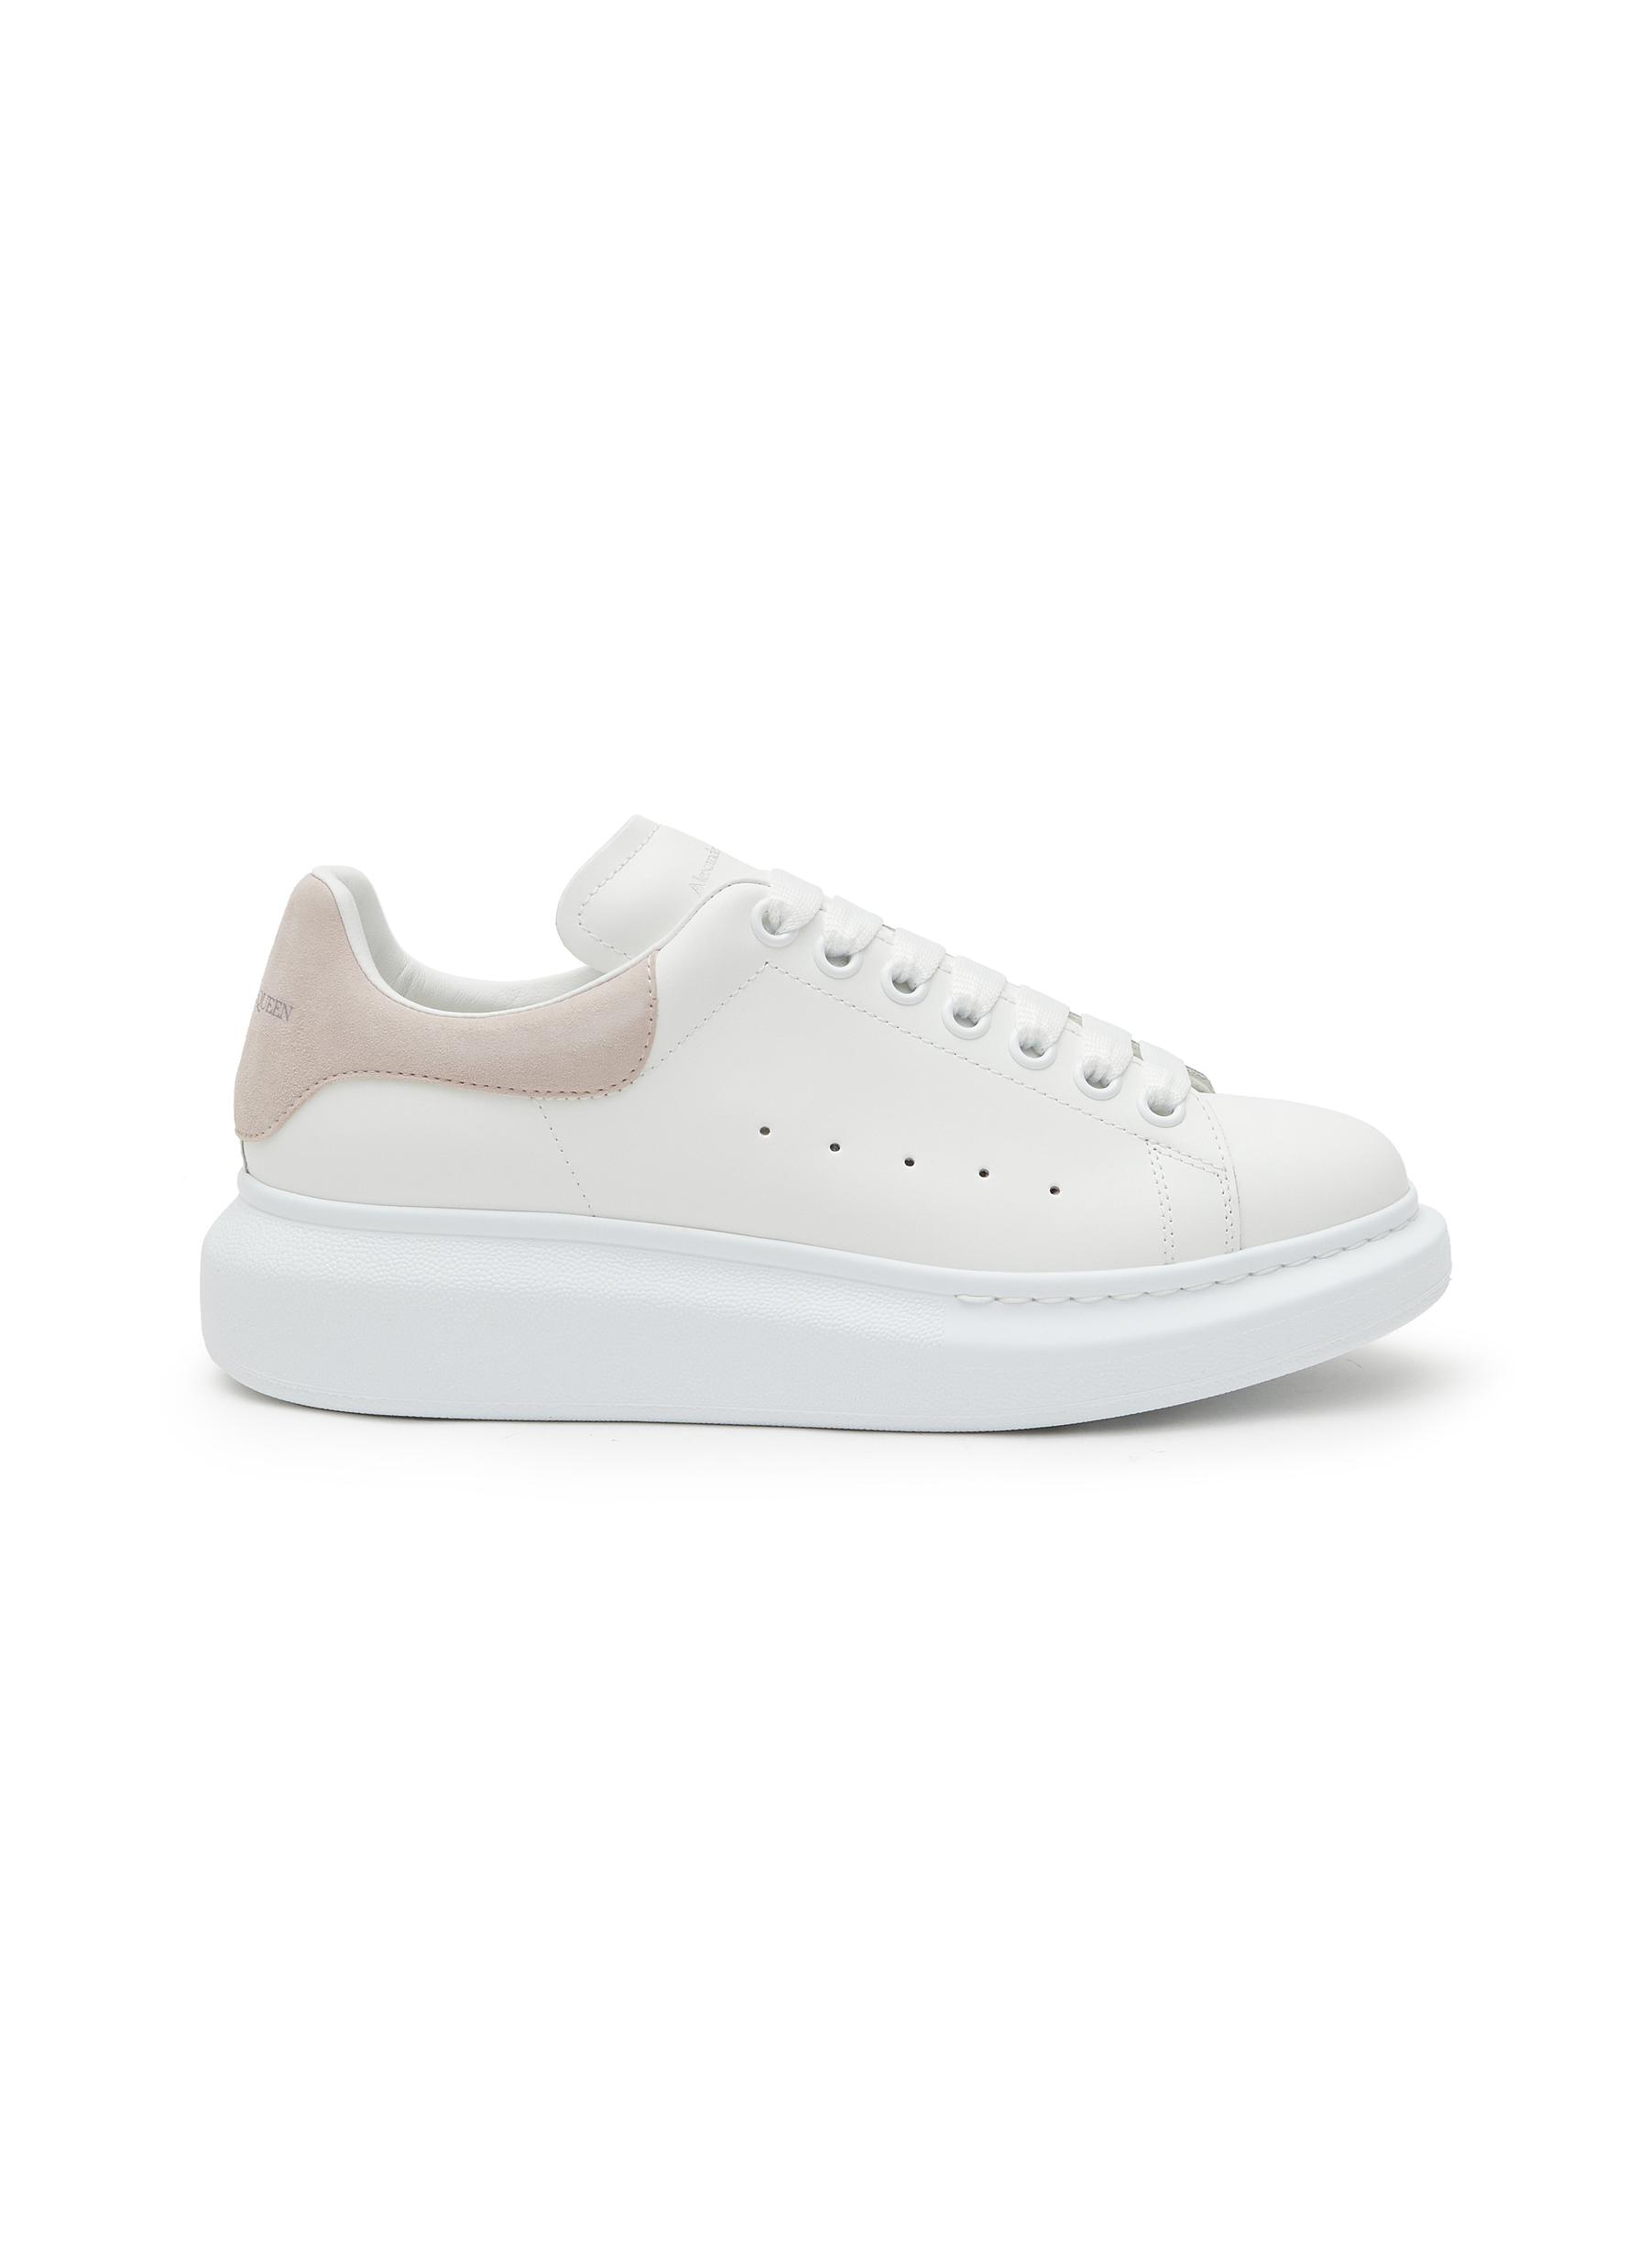 Alexander McQueen White Leather Oversized Sneakers